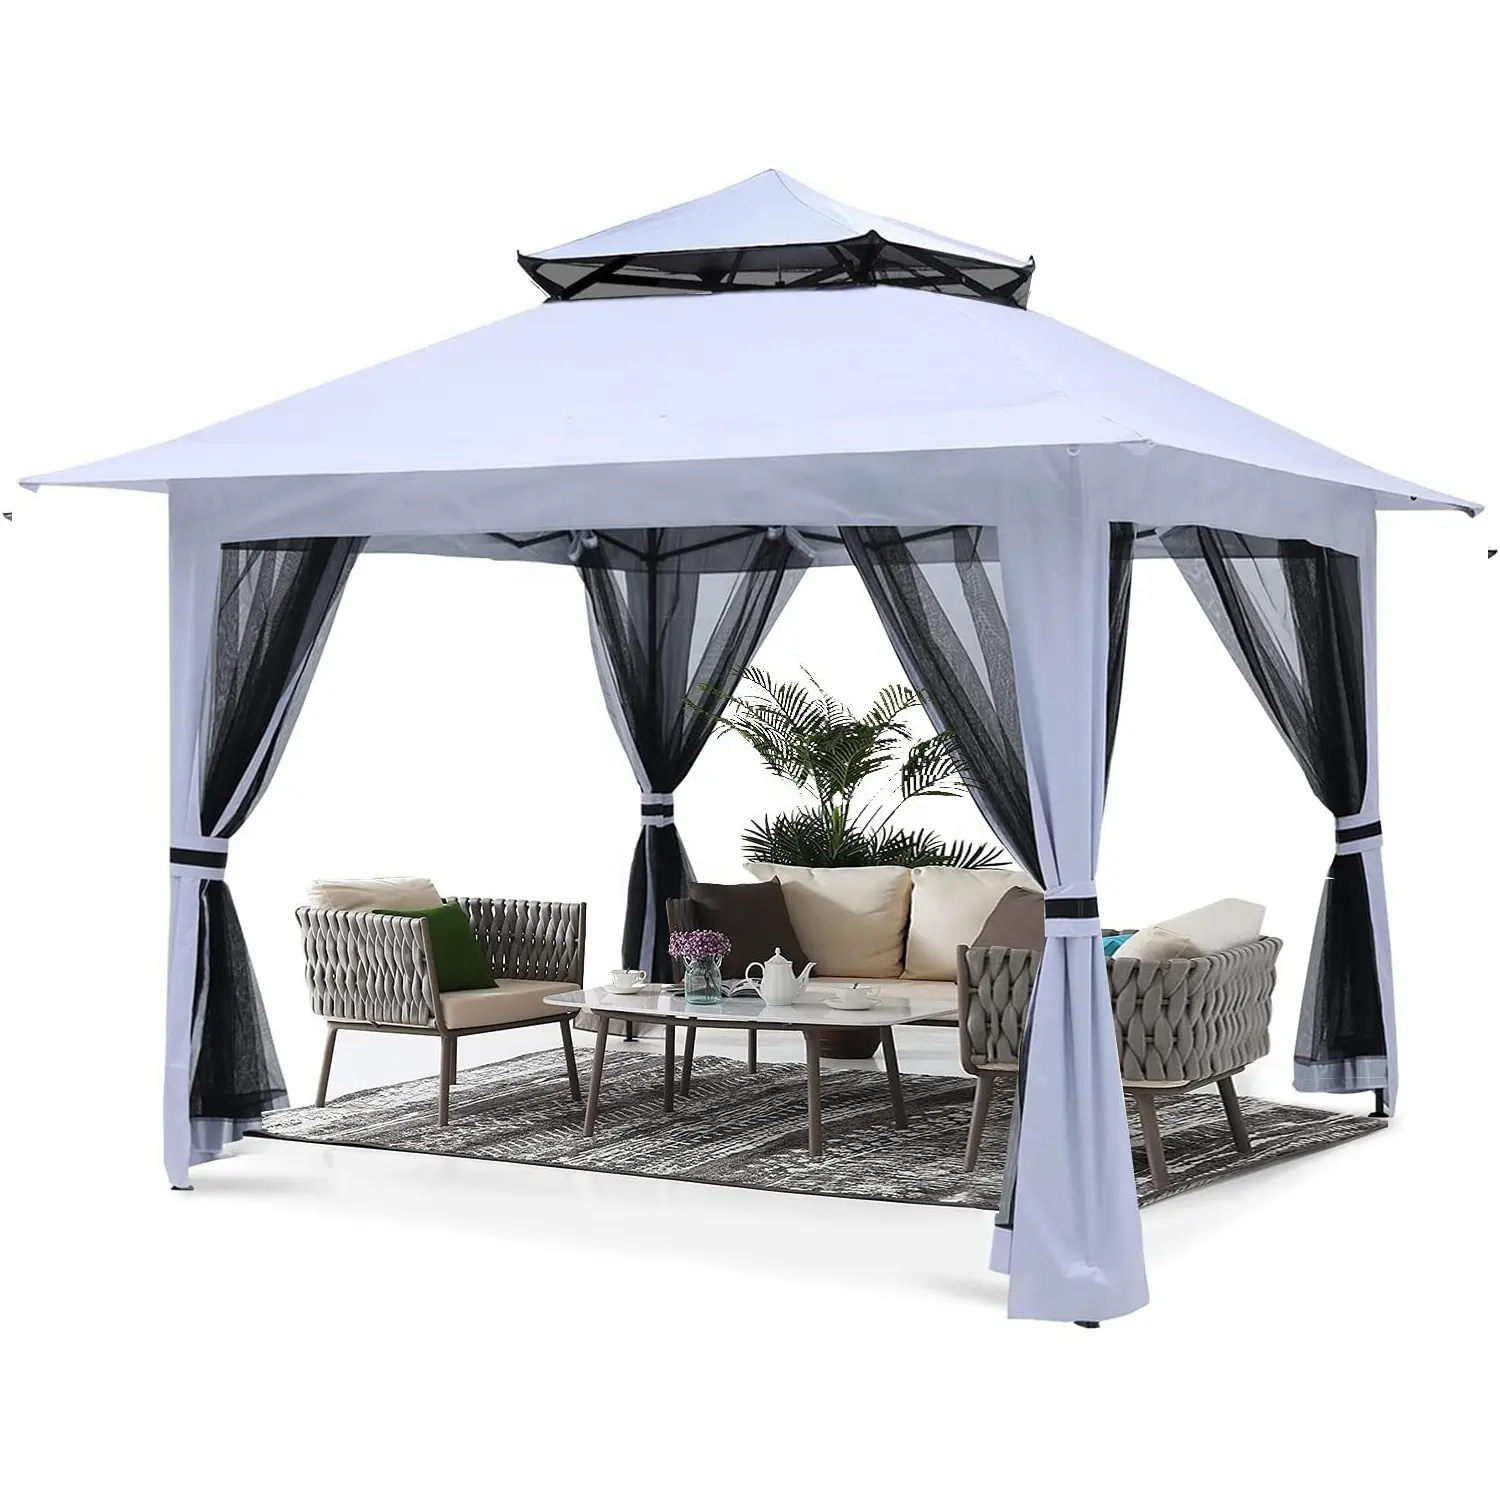 Glamping Tents for Sale Pop up Gazebo Canopy Shelter With Mosquito Netting Fold Tent Outdoor Garden Gazebo